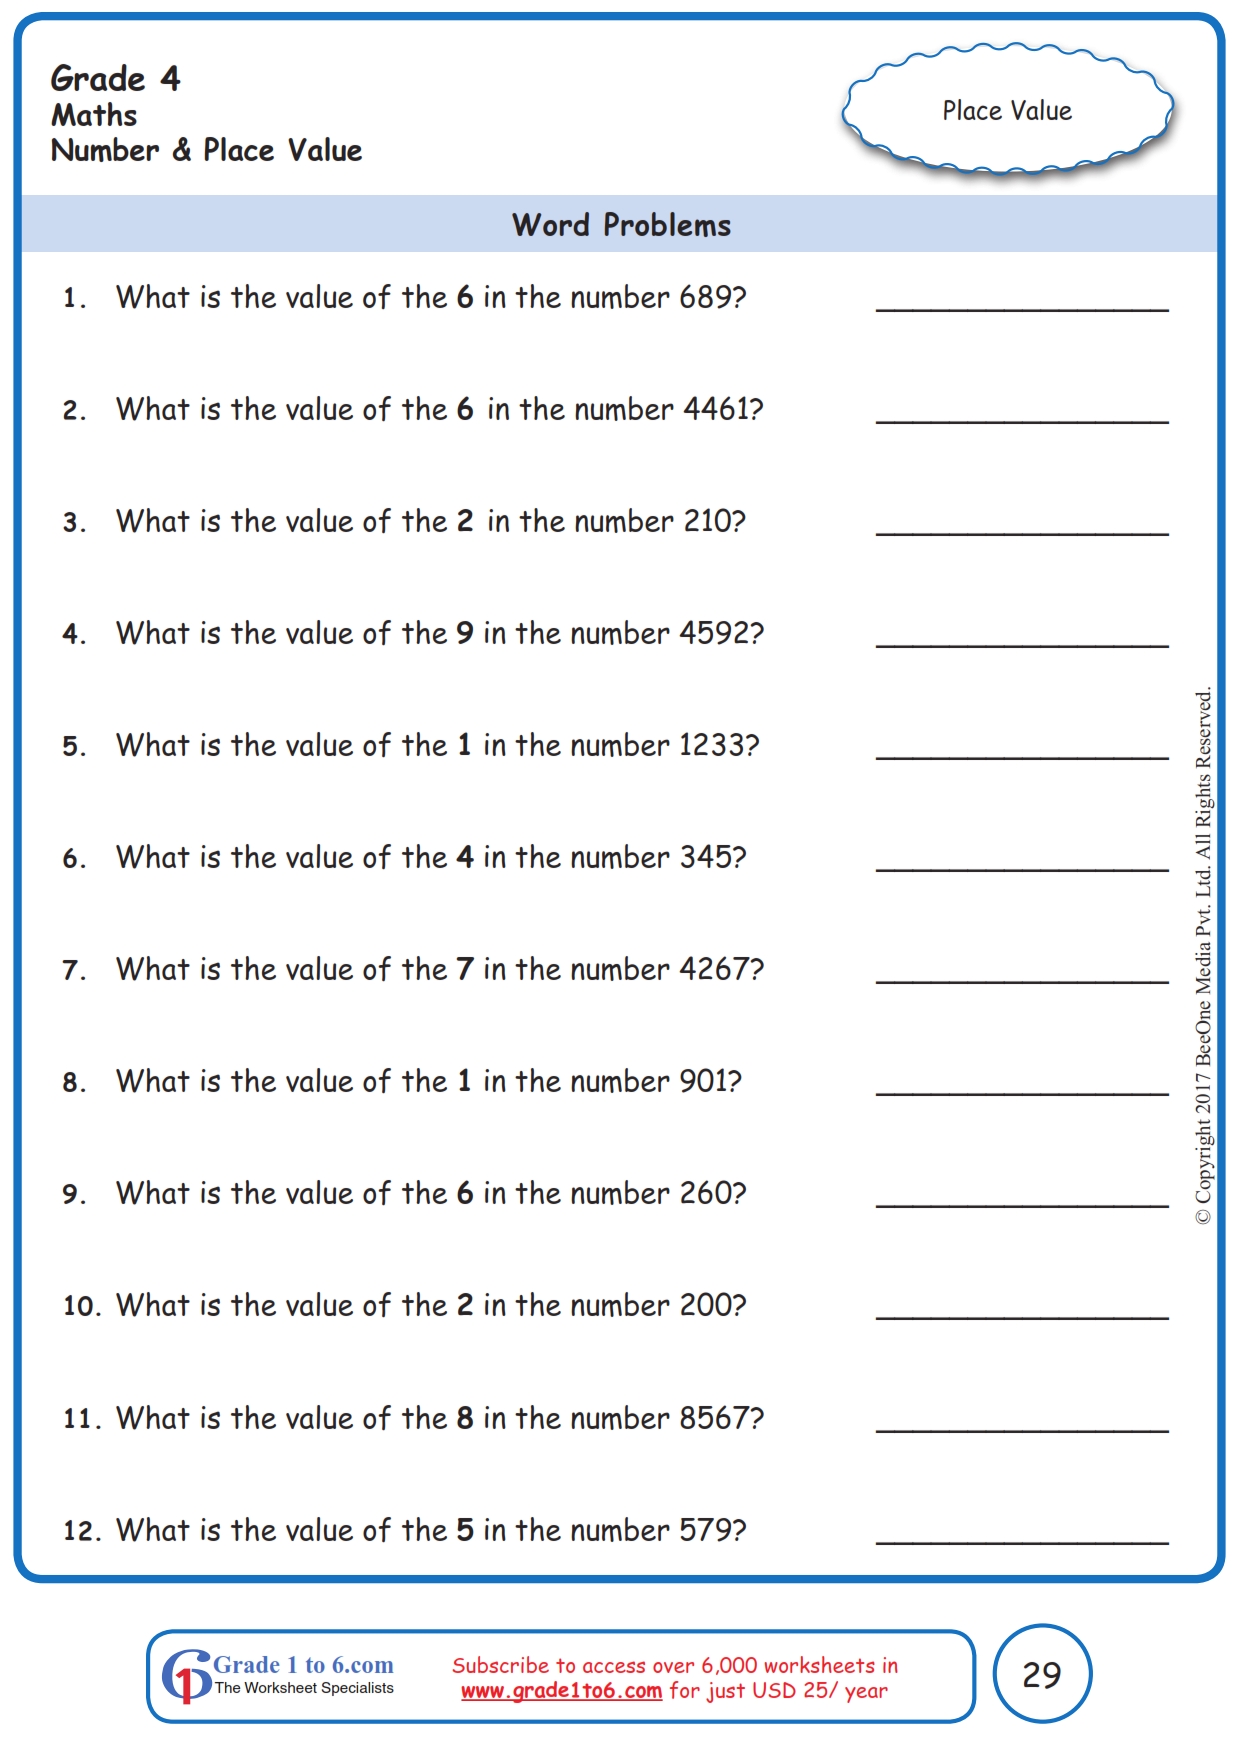 grade-4-place-value-worksheets-www-grade1to6